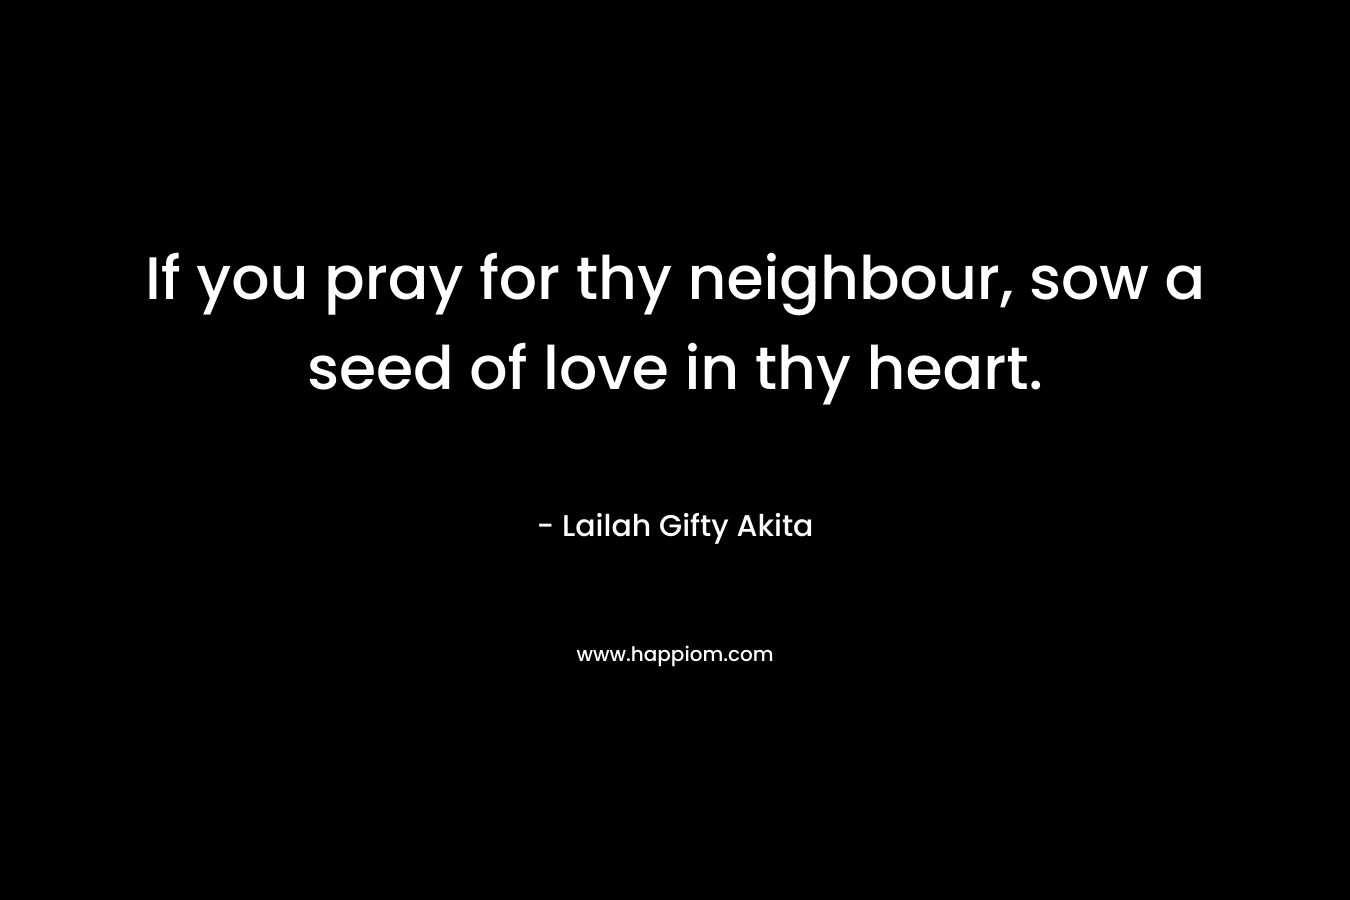 If you pray for thy neighbour, sow a seed of love in thy heart.